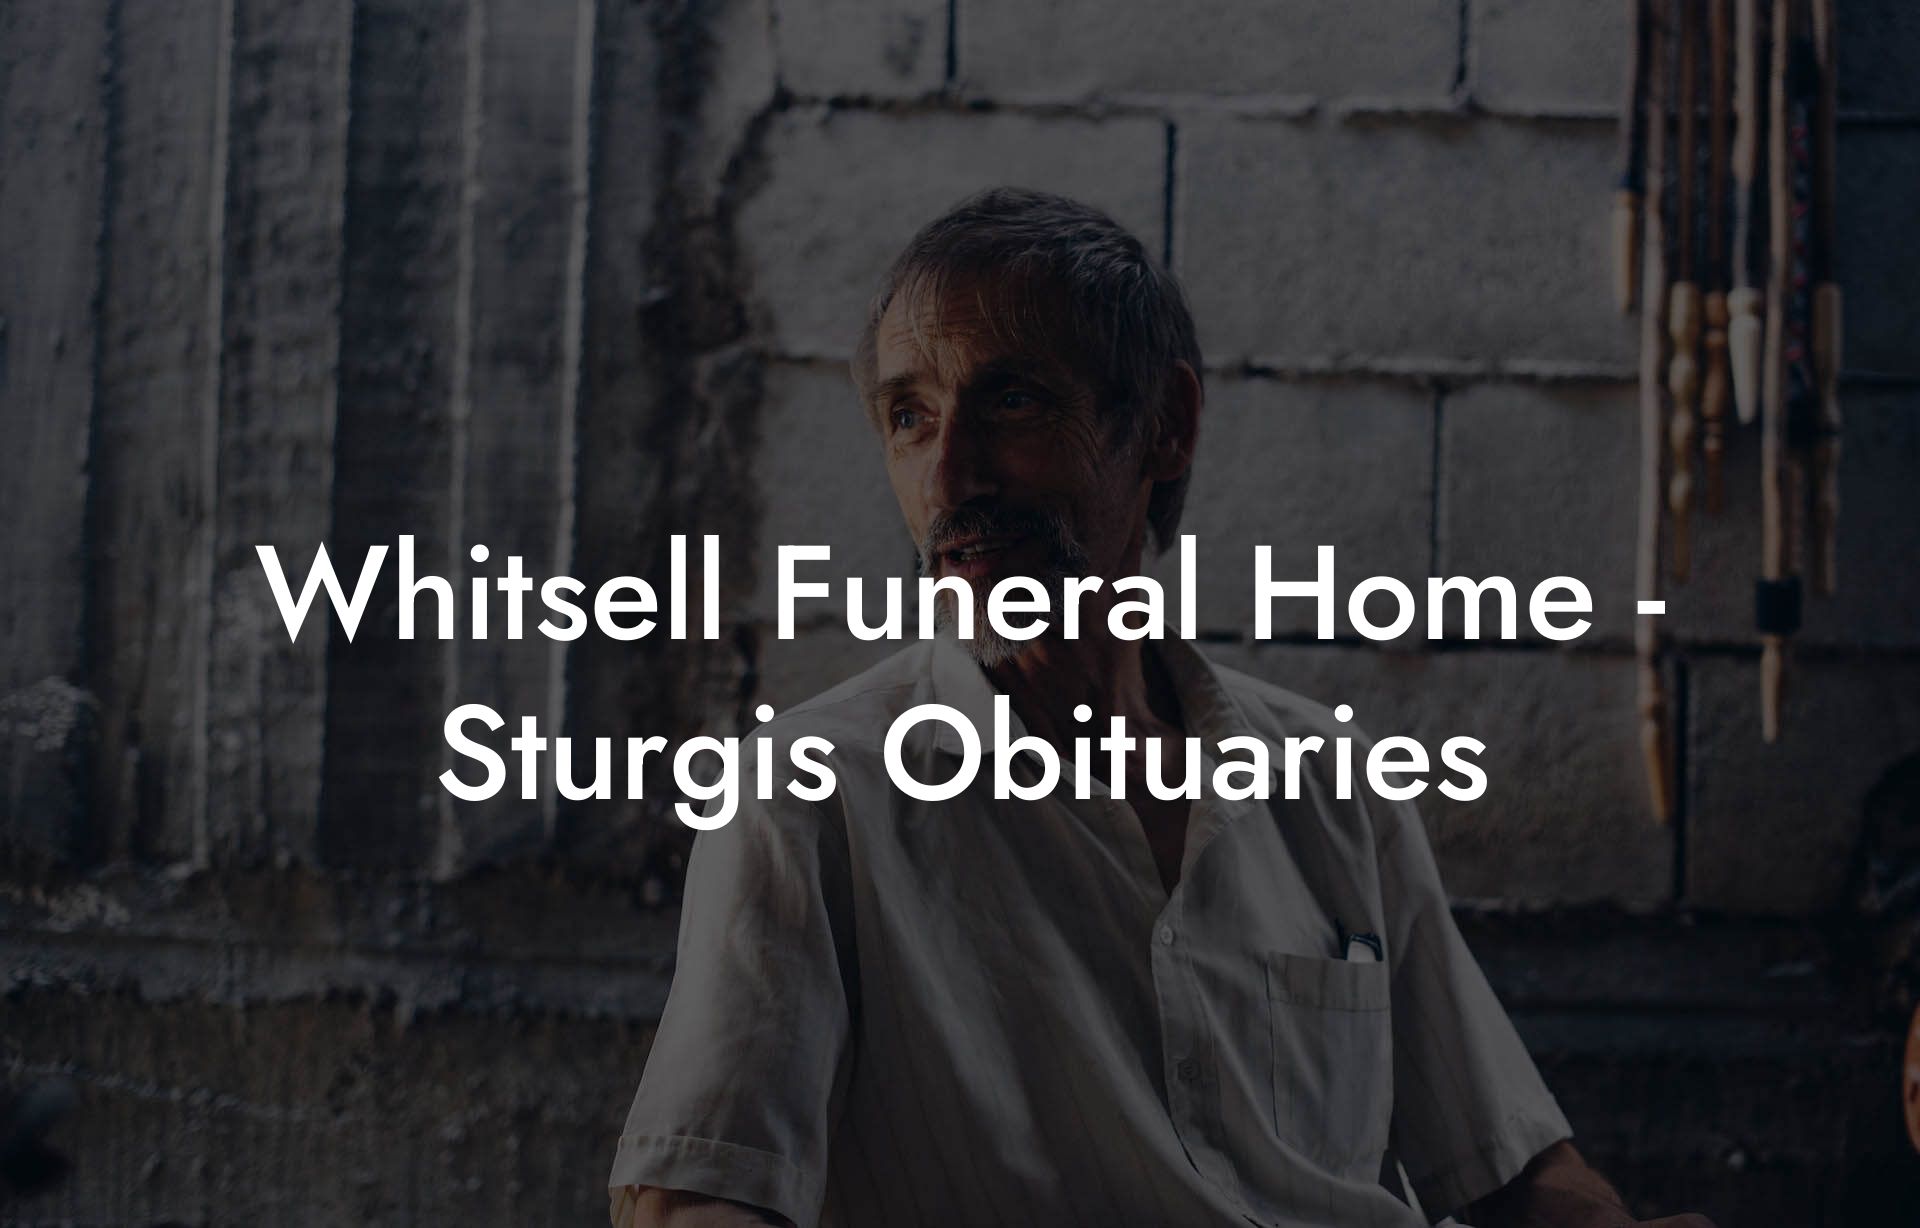 Whitsell Funeral Home - Sturgis Obituaries